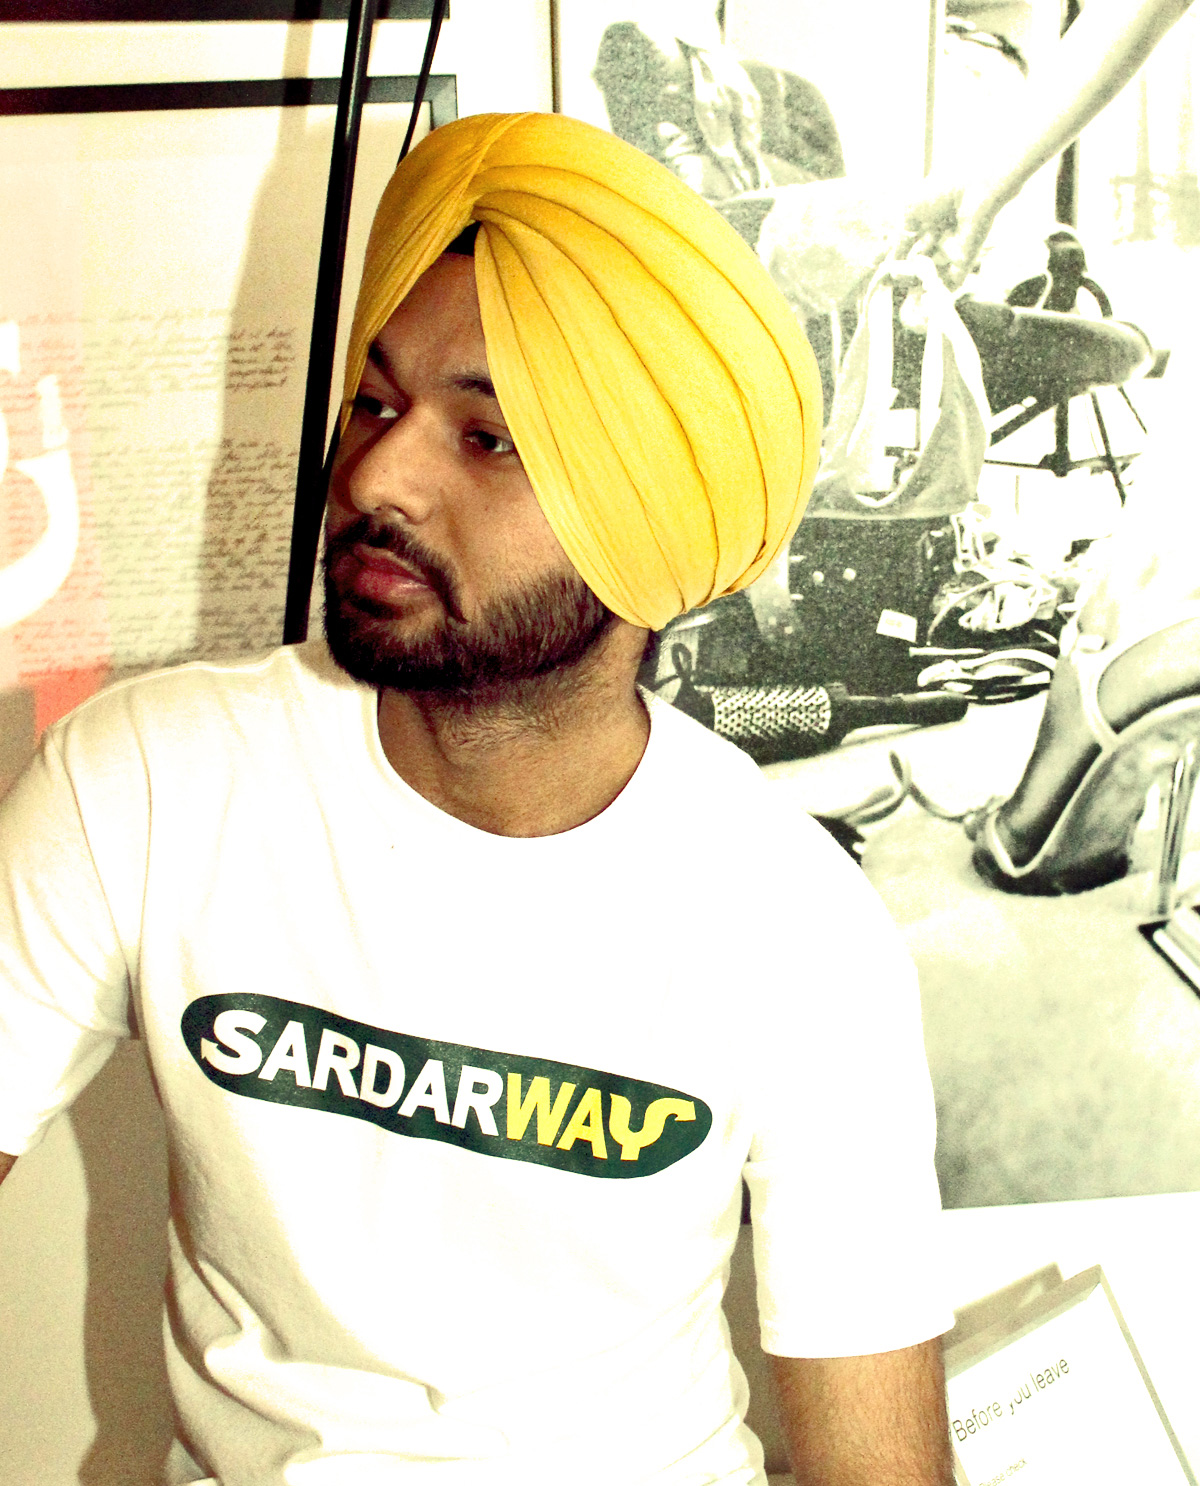 South Asian male model wearing white t.shirt with Graphic Design illustrated design on front that says SardawWay.  South Asian Desi Themed Graphic Design t.shirts by Brown Man Clothing Co.